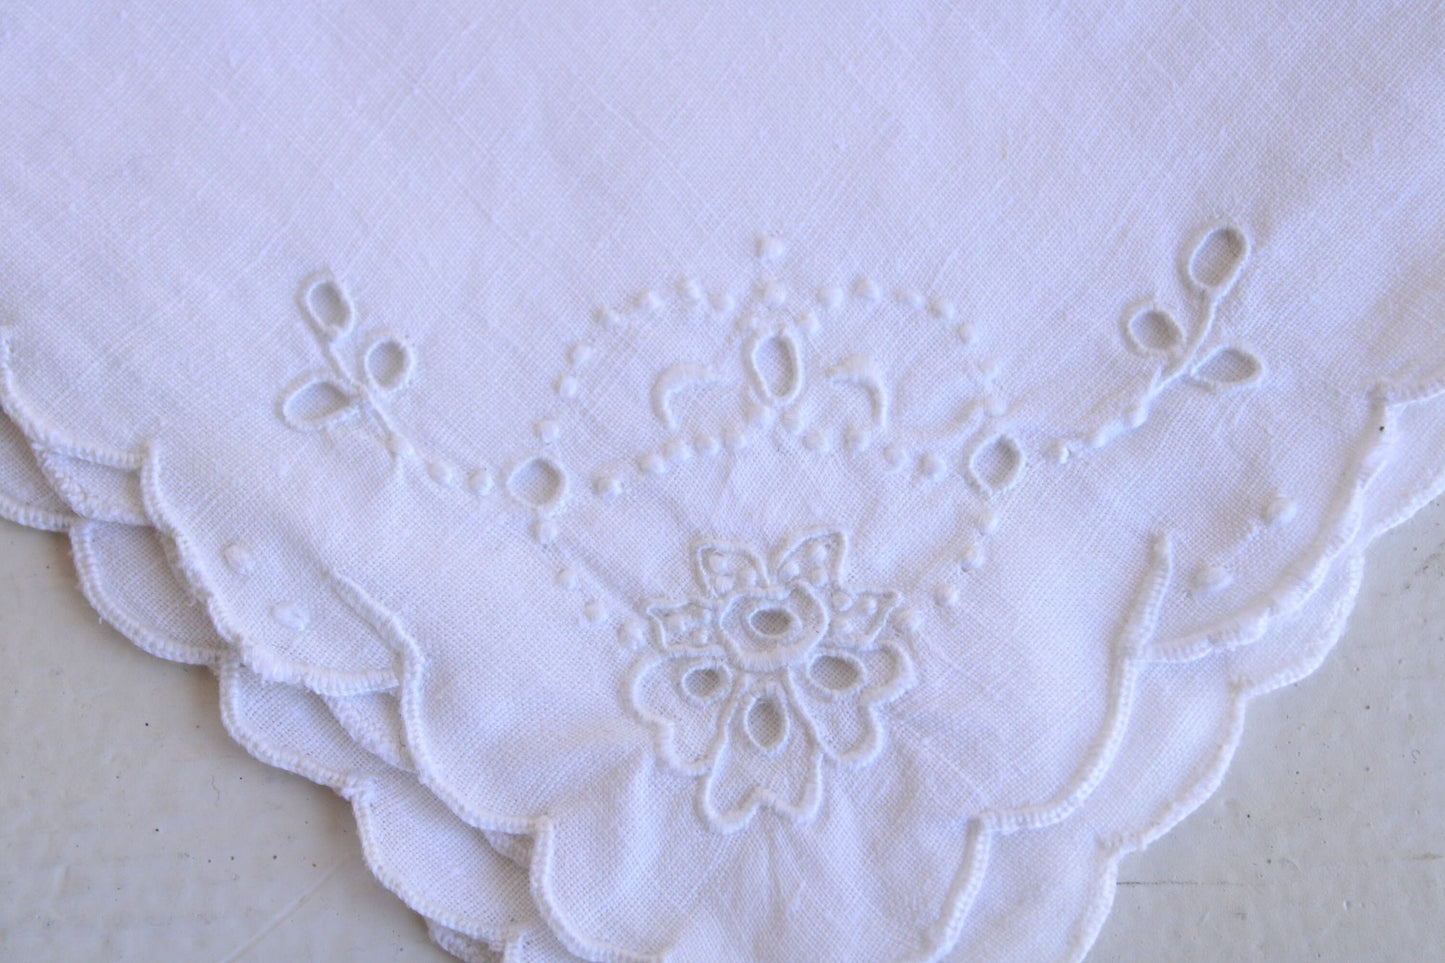 Vintage 1940s Napkins, Set of Five, White Linen Embroidered with Flowers